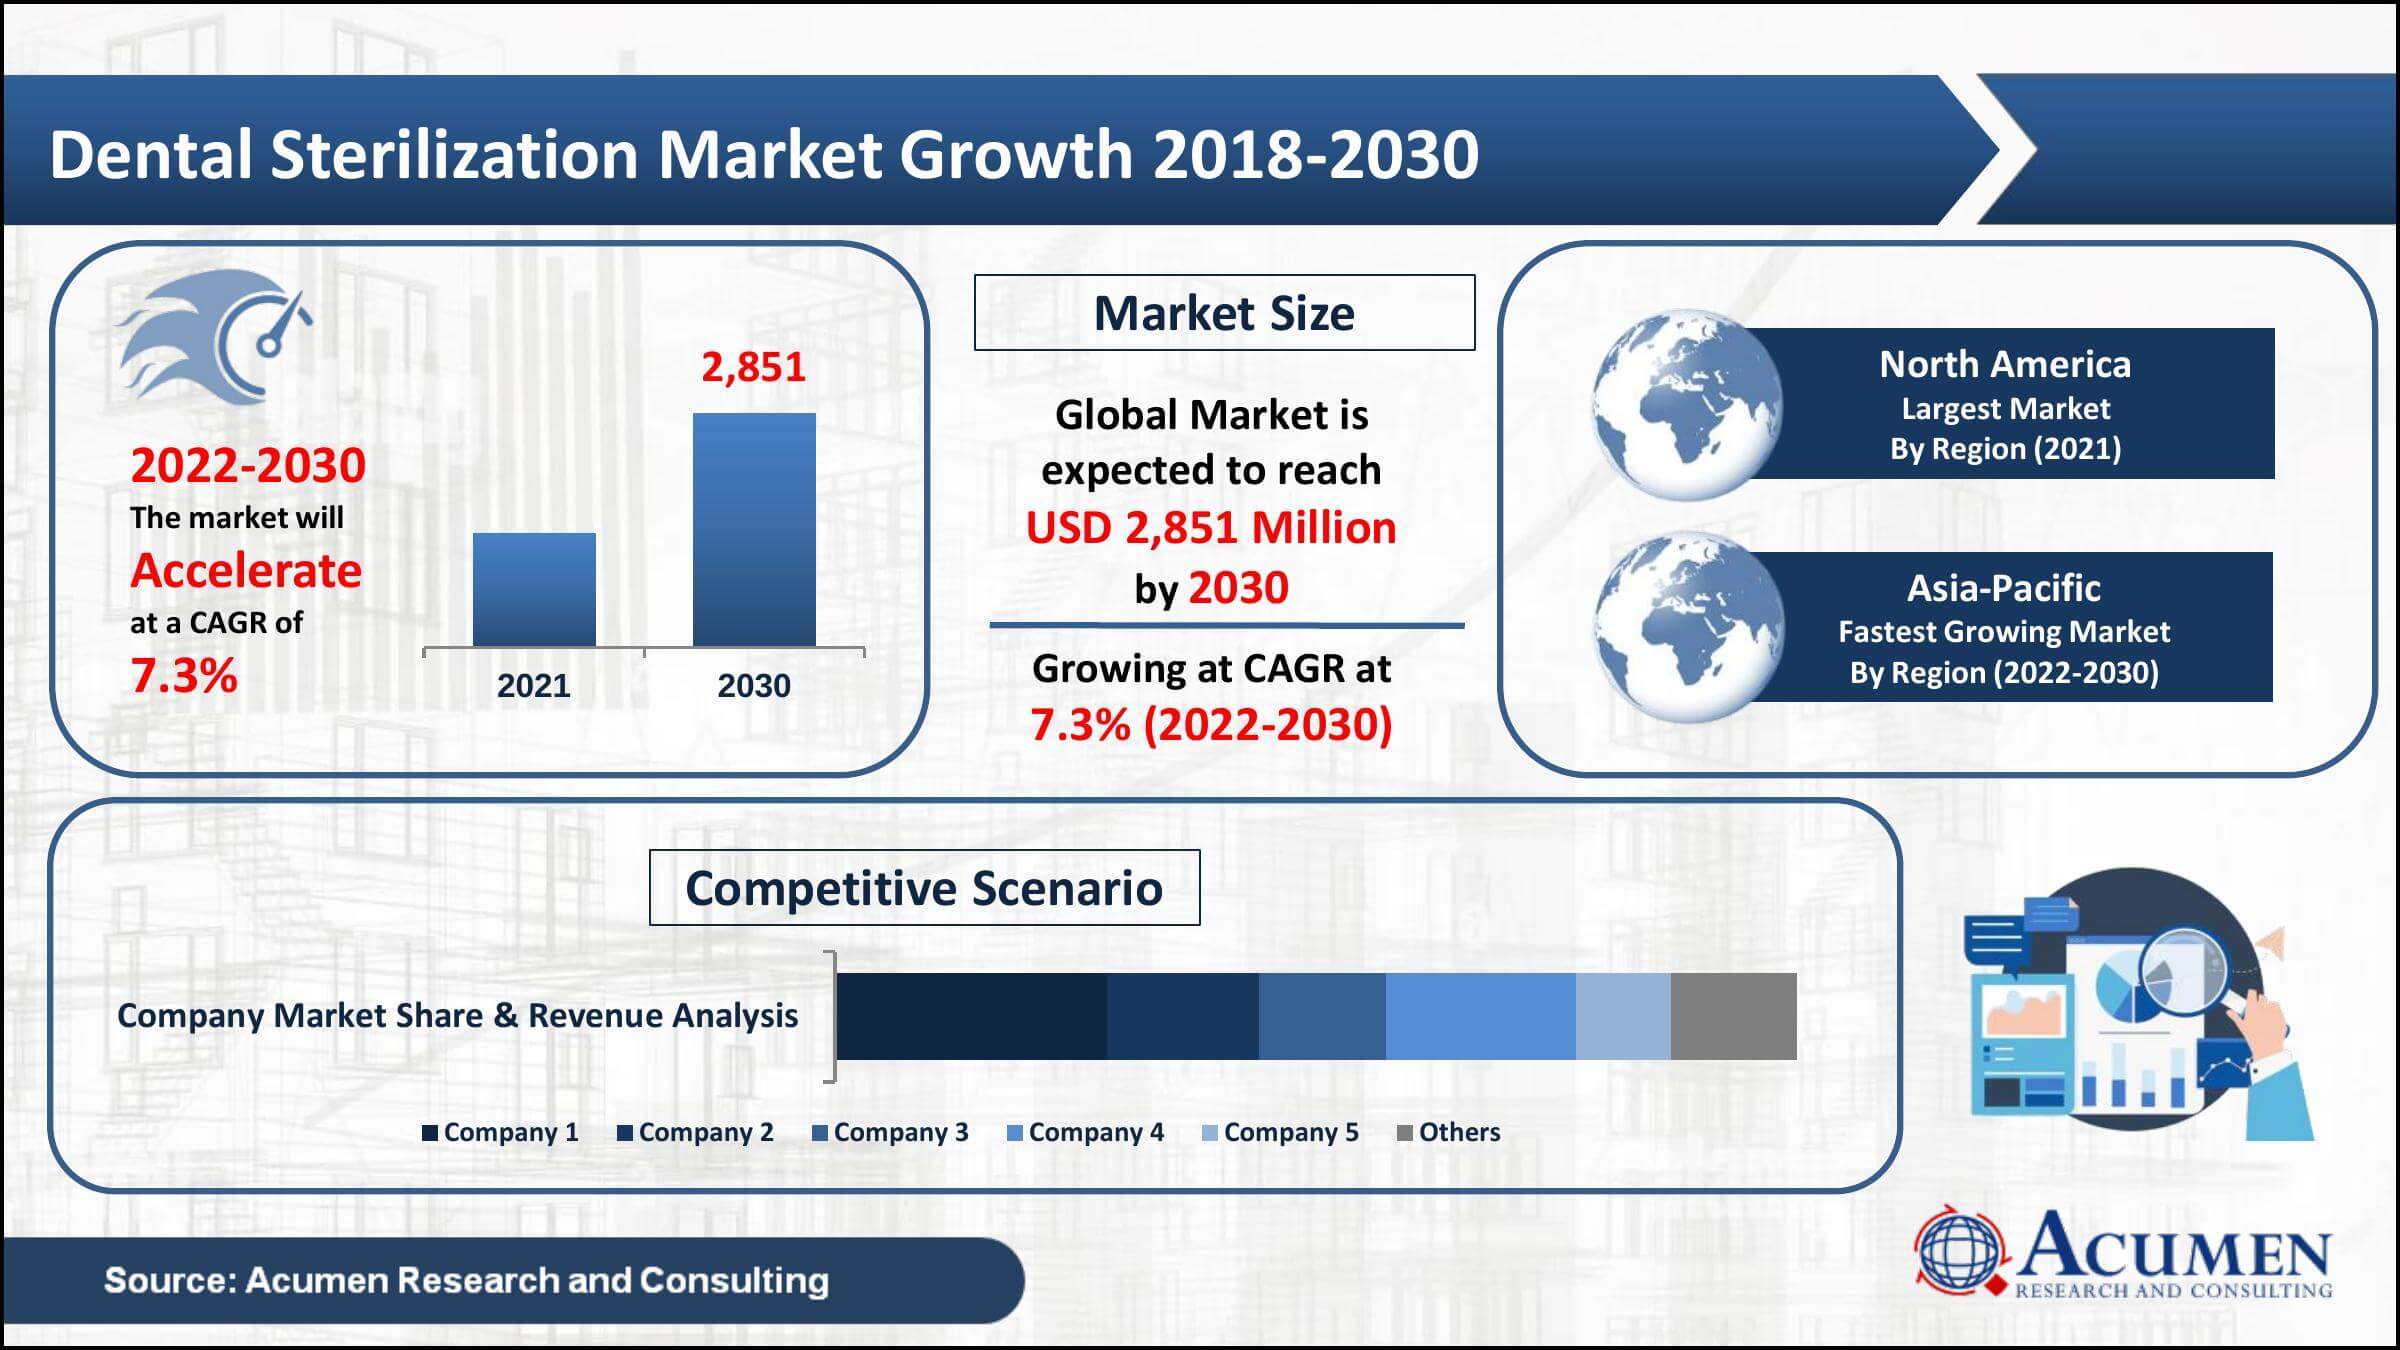 Global dental sterilization market revenue collected USD 1,541 Million in 2021, with a 7.3% CAGR between 2022 and 2030